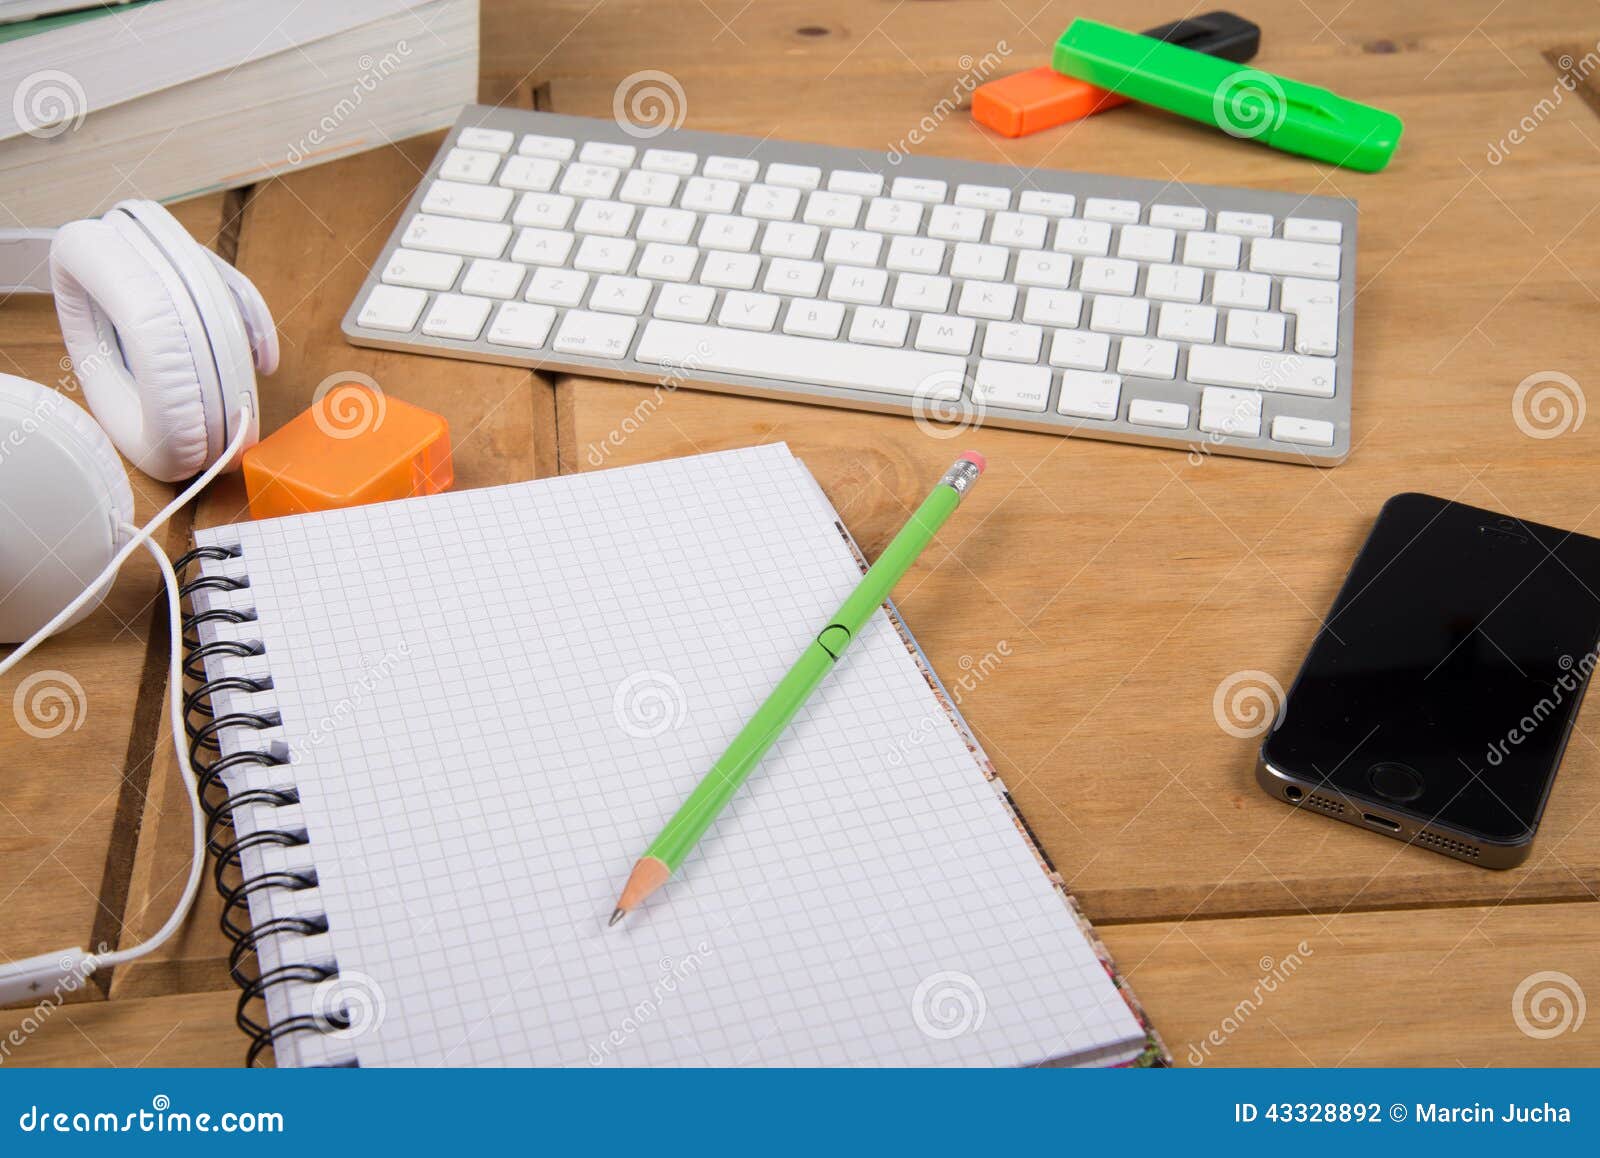 View On College Student Desk Top Workspace Stock Photo Image Of